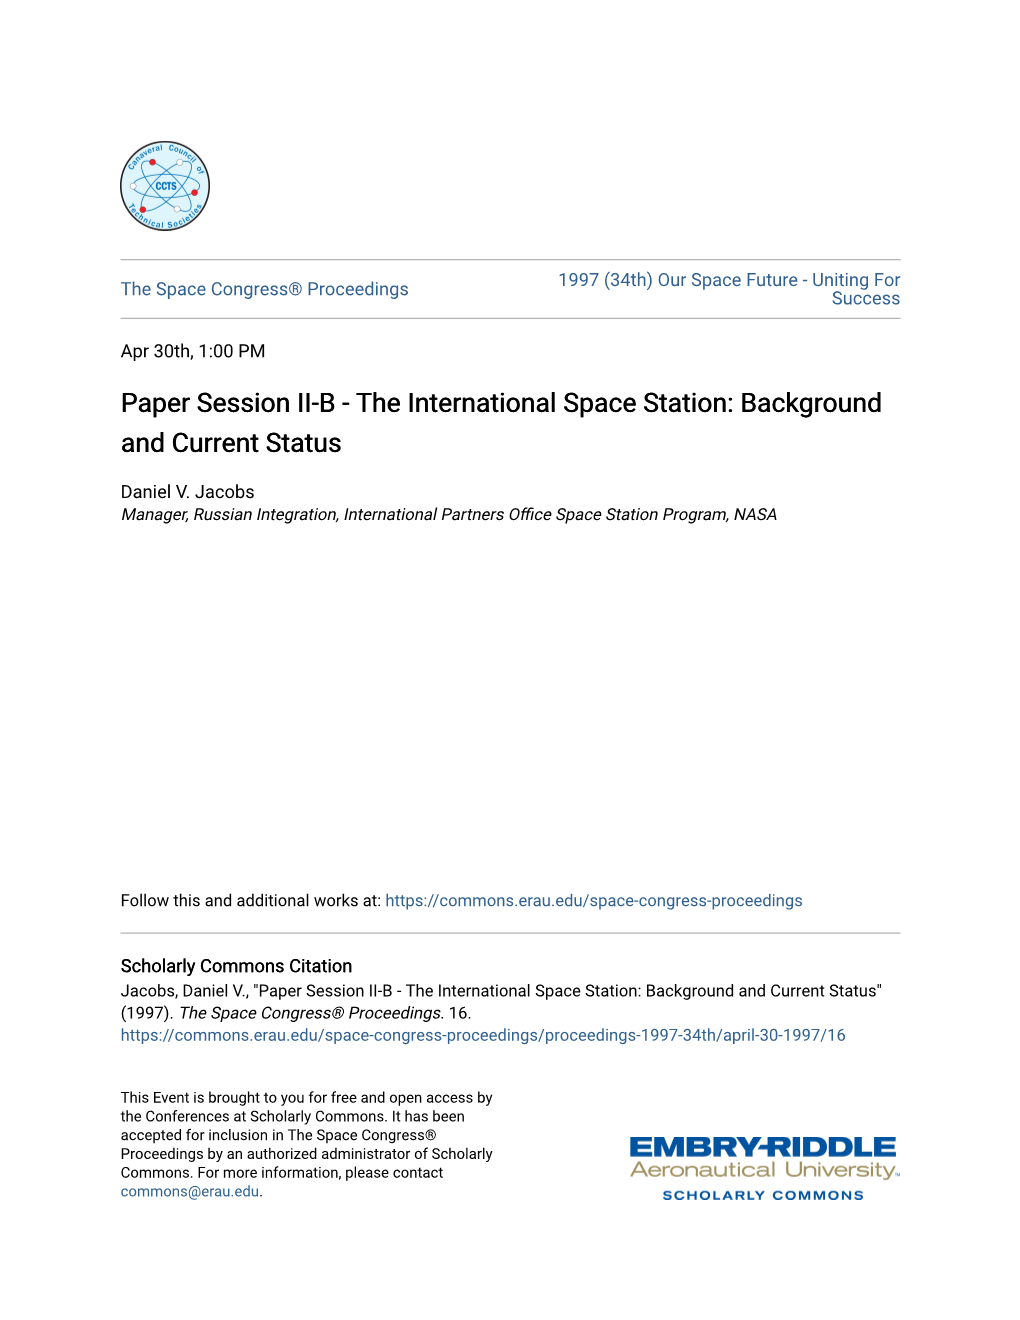 Paper Session II-B - the International Space Station: Background and Current Status